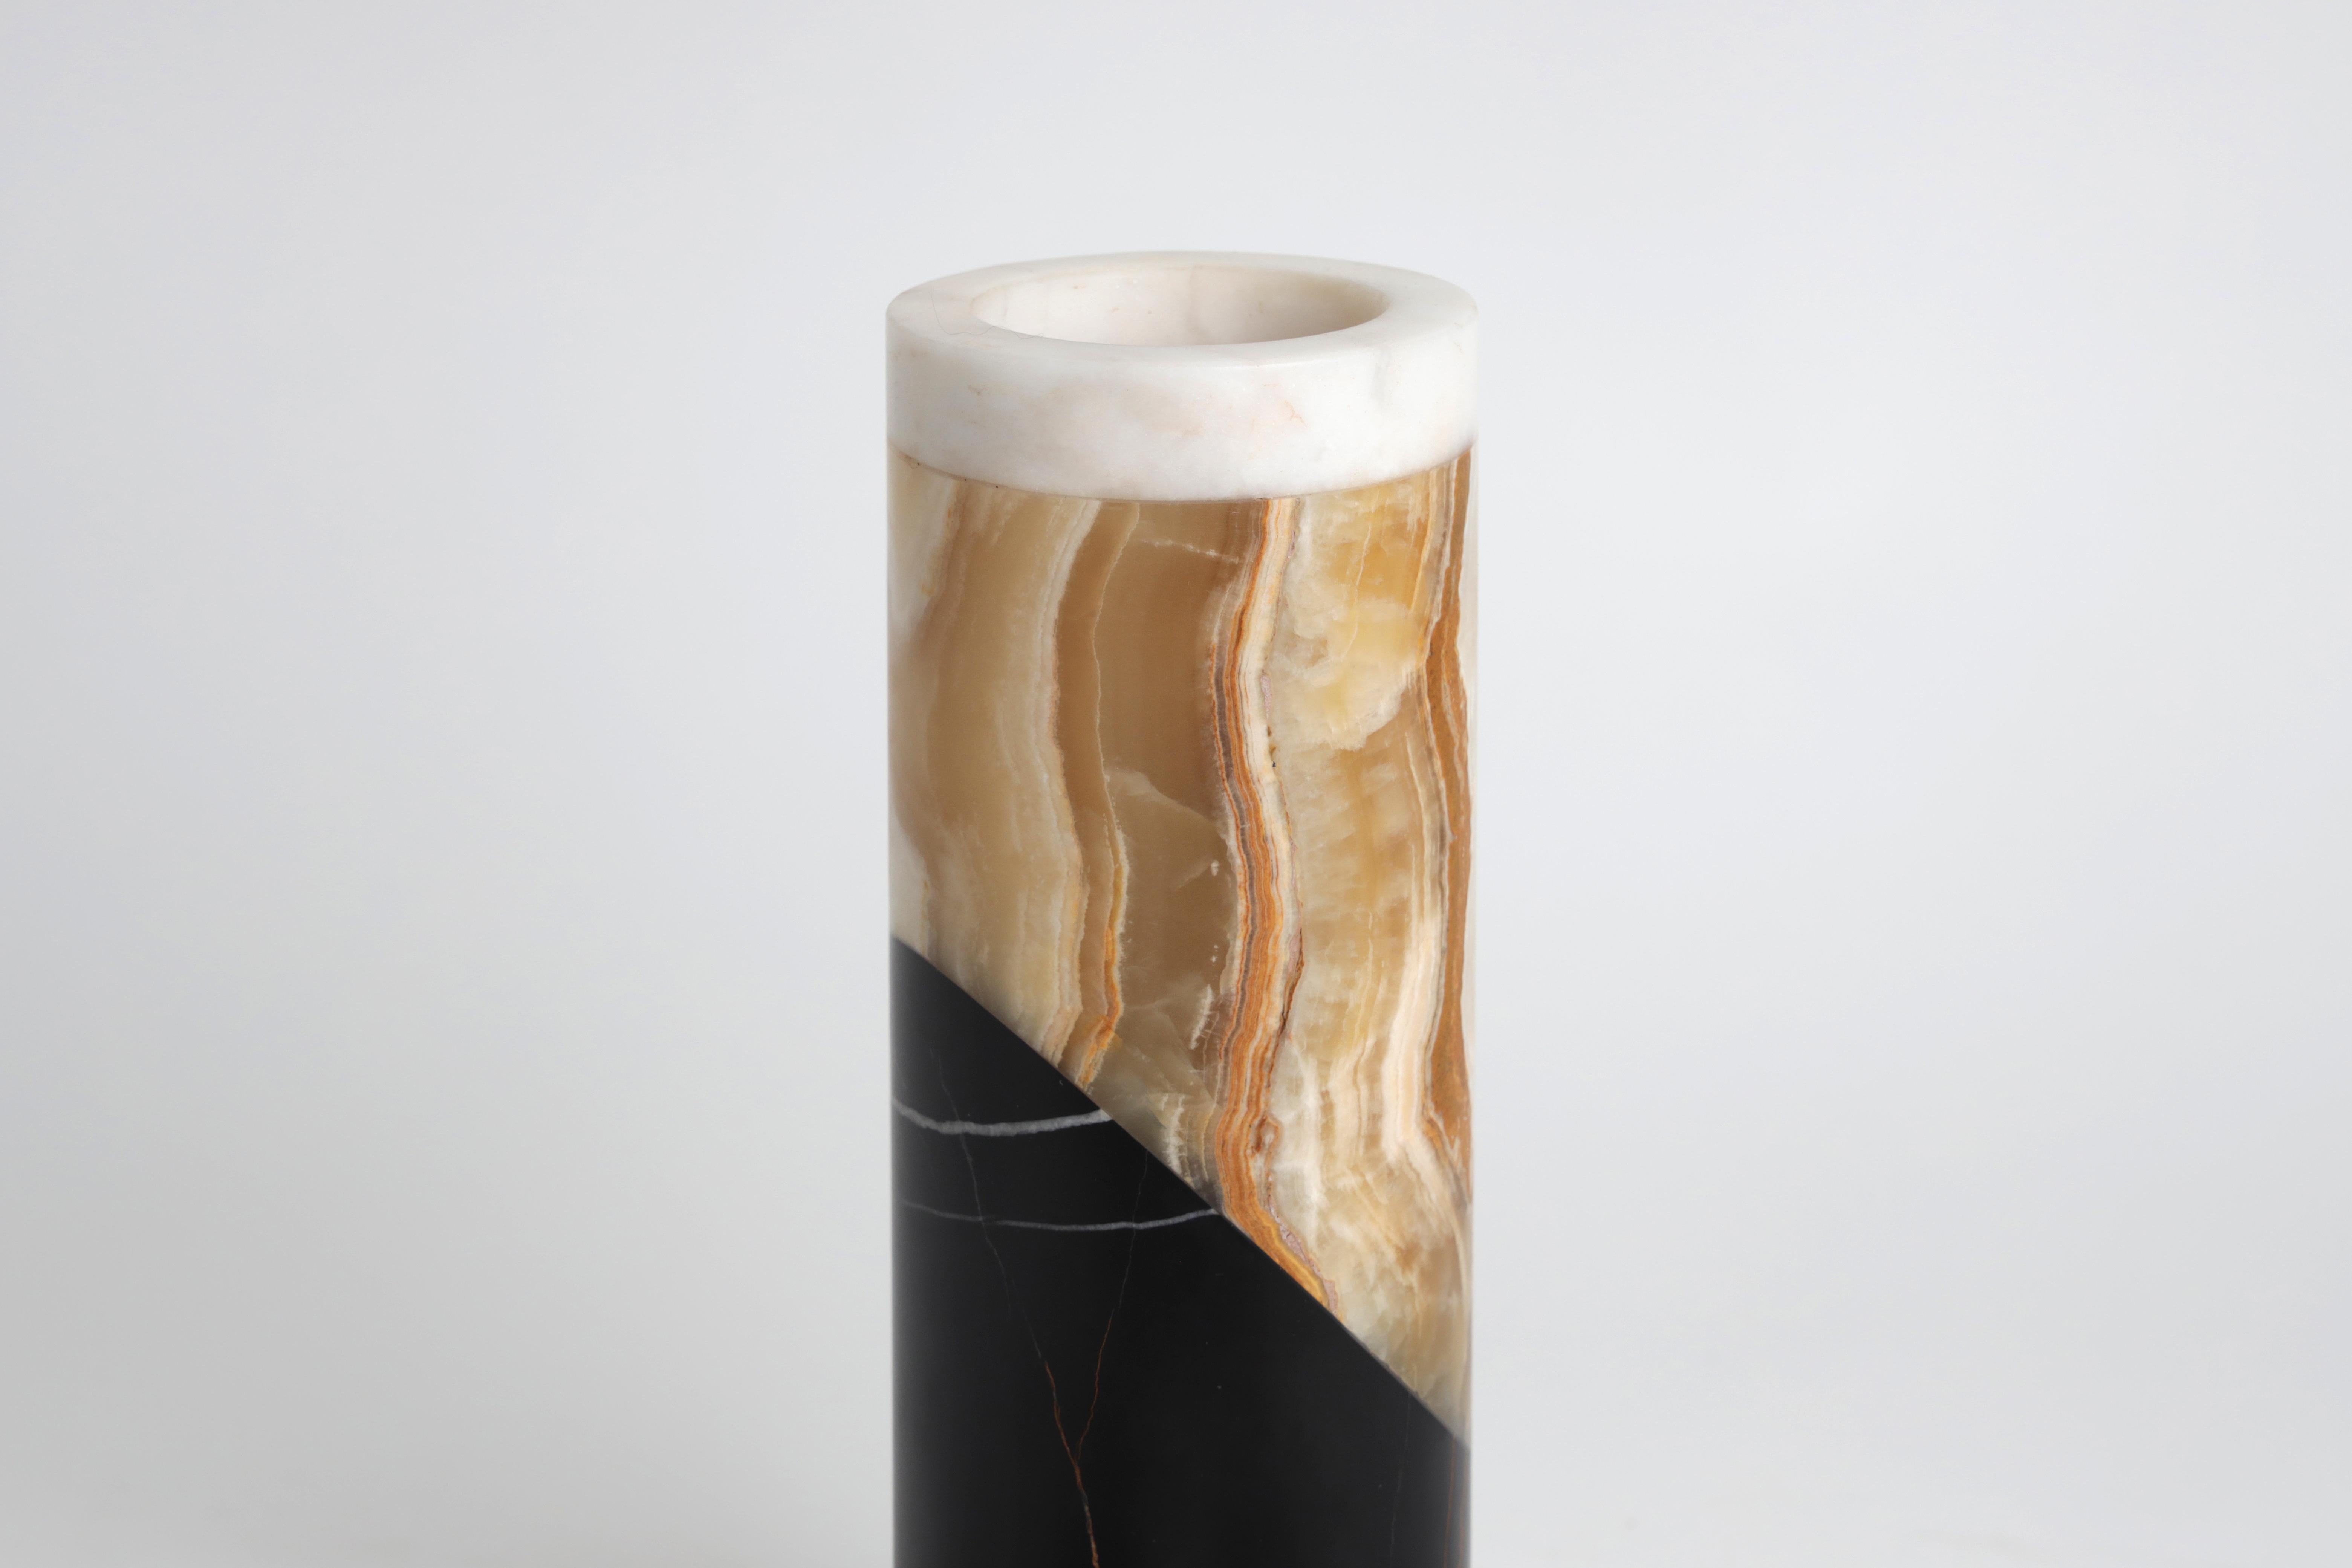 This is blasphemy. The impious intersection of materials. The melding of marble and onyx, merged together in an ode to the curve.

Starting from rectangular blocks, they are polished, federated, and put on the turning table and spun, and slowly